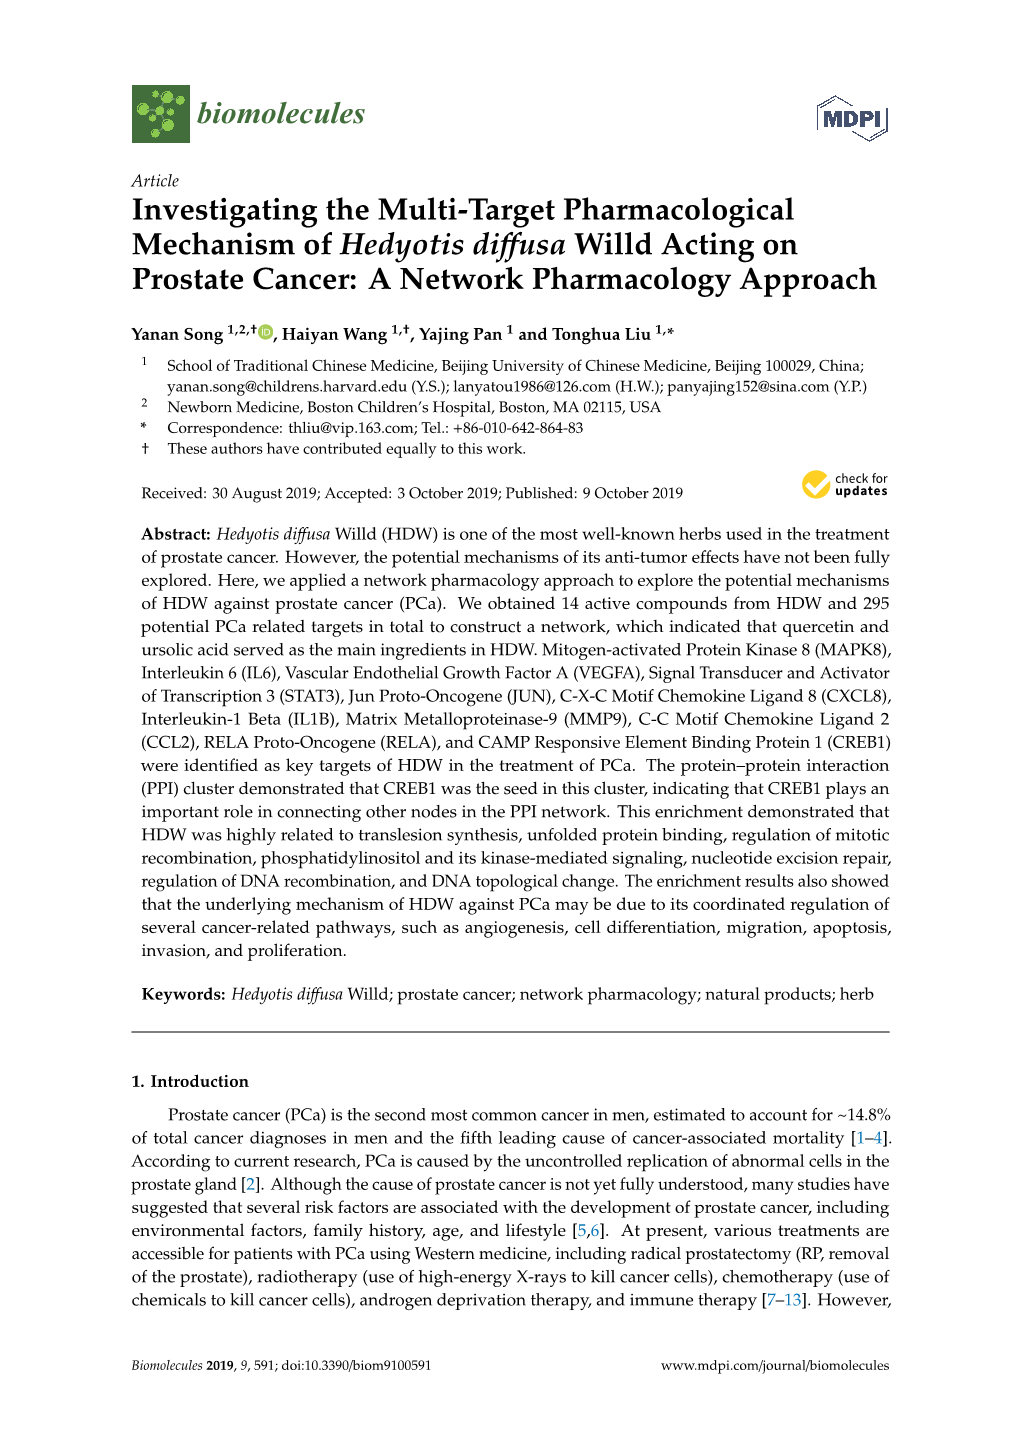 Investigating the Multi-Target Pharmacological Mechanism of Hedyotis Diﬀusa Willd Acting on Prostate Cancer: a Network Pharmacology Approach